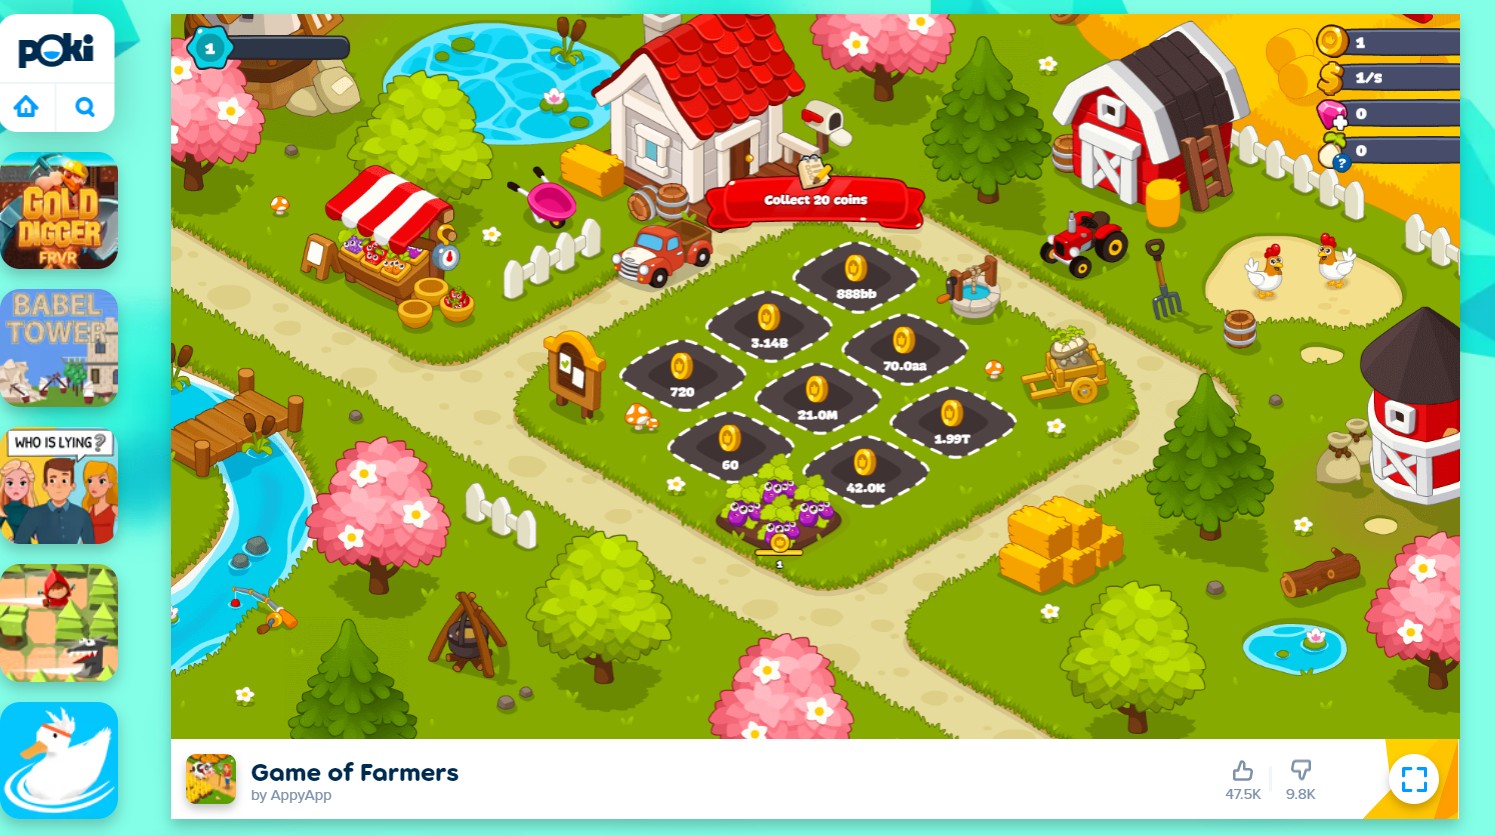 <img src="game.jpg" alt="game of farmers by appy app"/> 